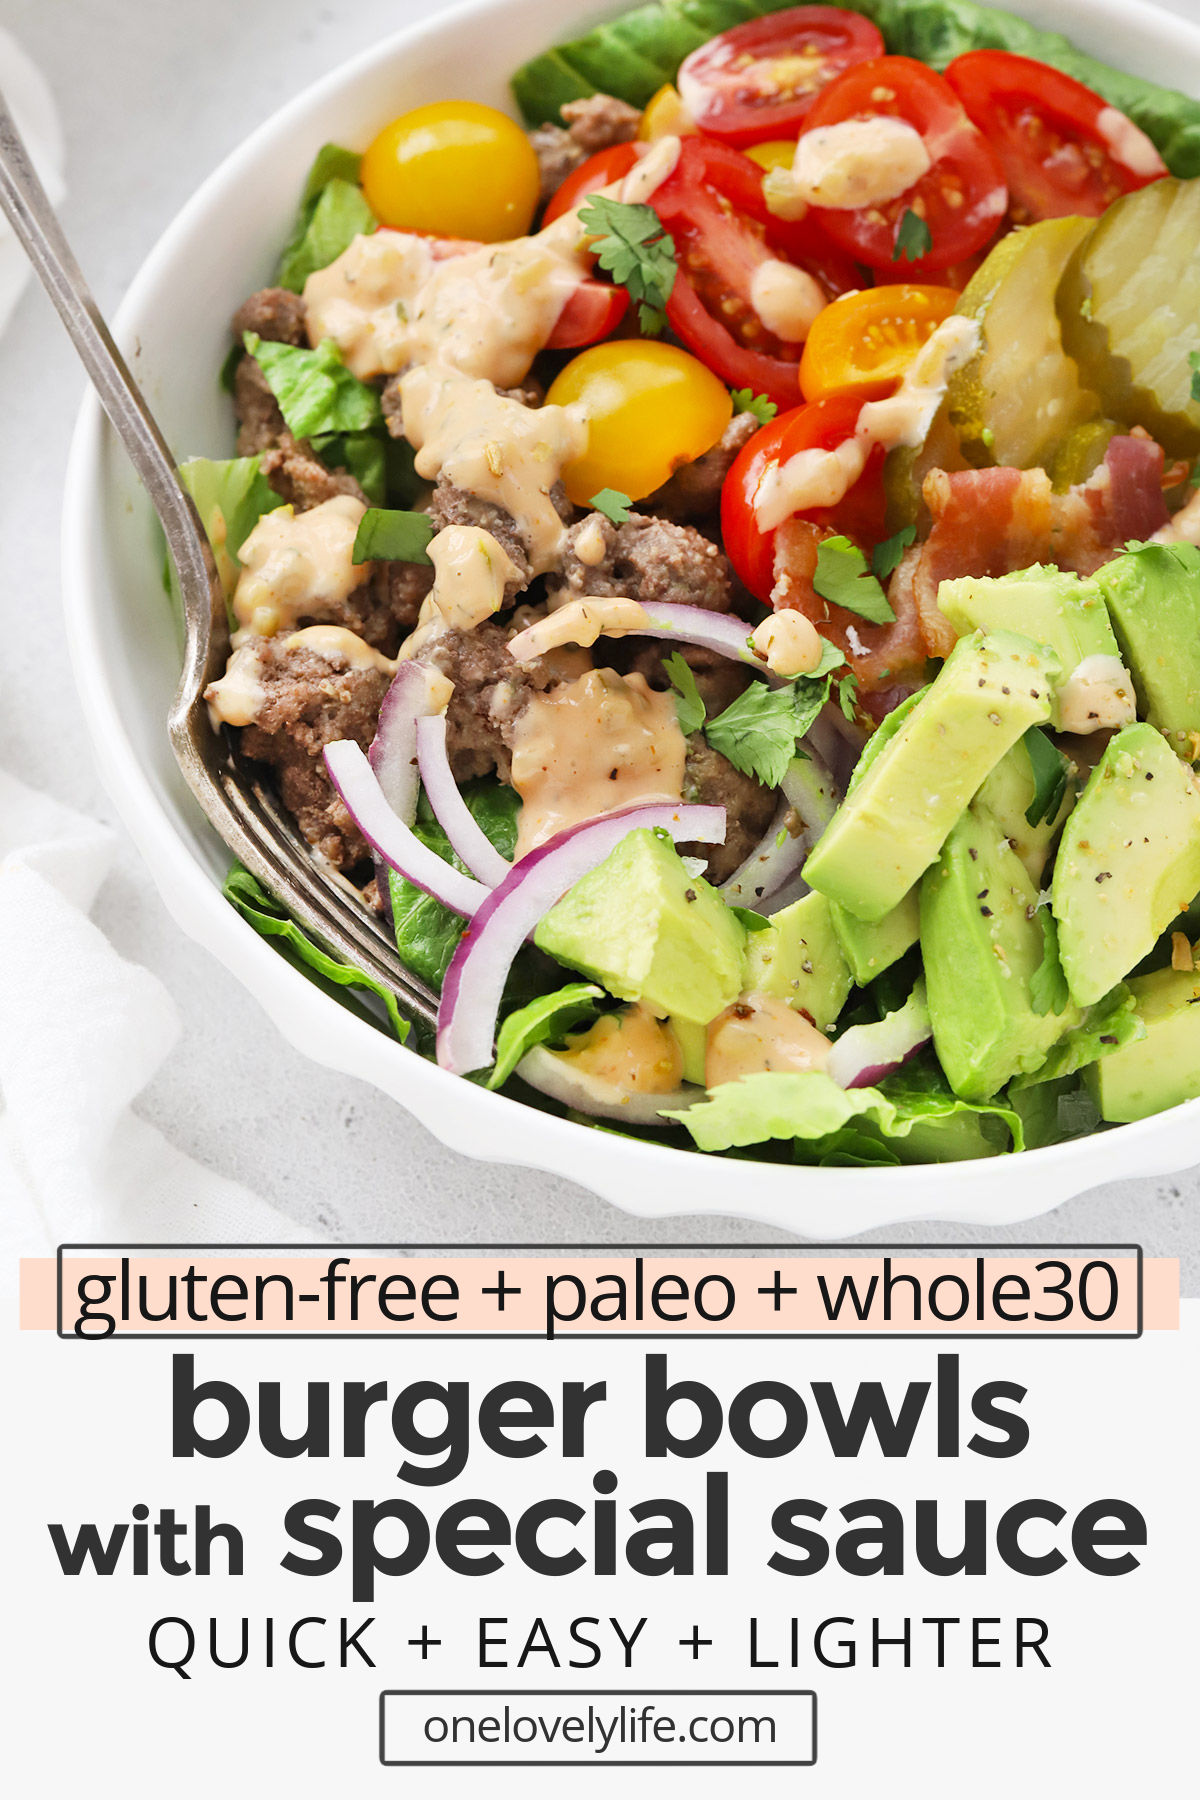 Burger Bowls with Special Sauce - Load all your favorite hamburger toppings onto a bed of greens and drizzle with our favorite special sauce to build an amazing burger salad. (Gluten-Free, Paleo & Whole30-Friendly) // Whole30 Burger Bowls // Special Sauce for Burgers // Paleo Burger Bowl // Burger Salad